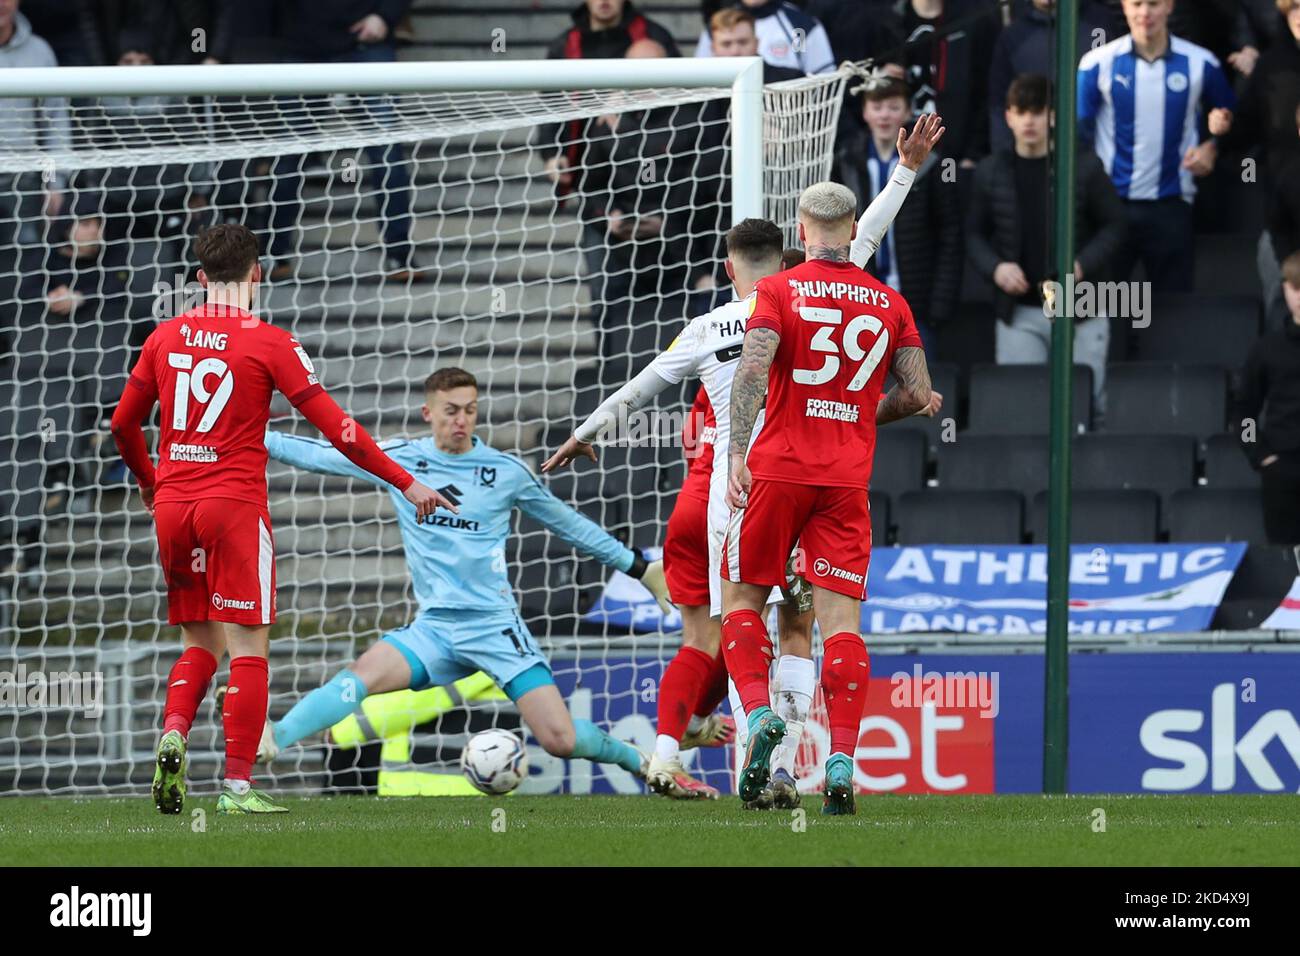 Tom Naylor scores for Wigan Athletic, to take the lead to make it 1 - 0 against Milton Keynes Dons, during the Sky Bet League 1 match between MK Dons and Wigan Athletic at Stadium MK, Milton Keynes on Saturday 12th March 2022. (Photo by John Cripps/MI News/NurPhoto) Stock Photo